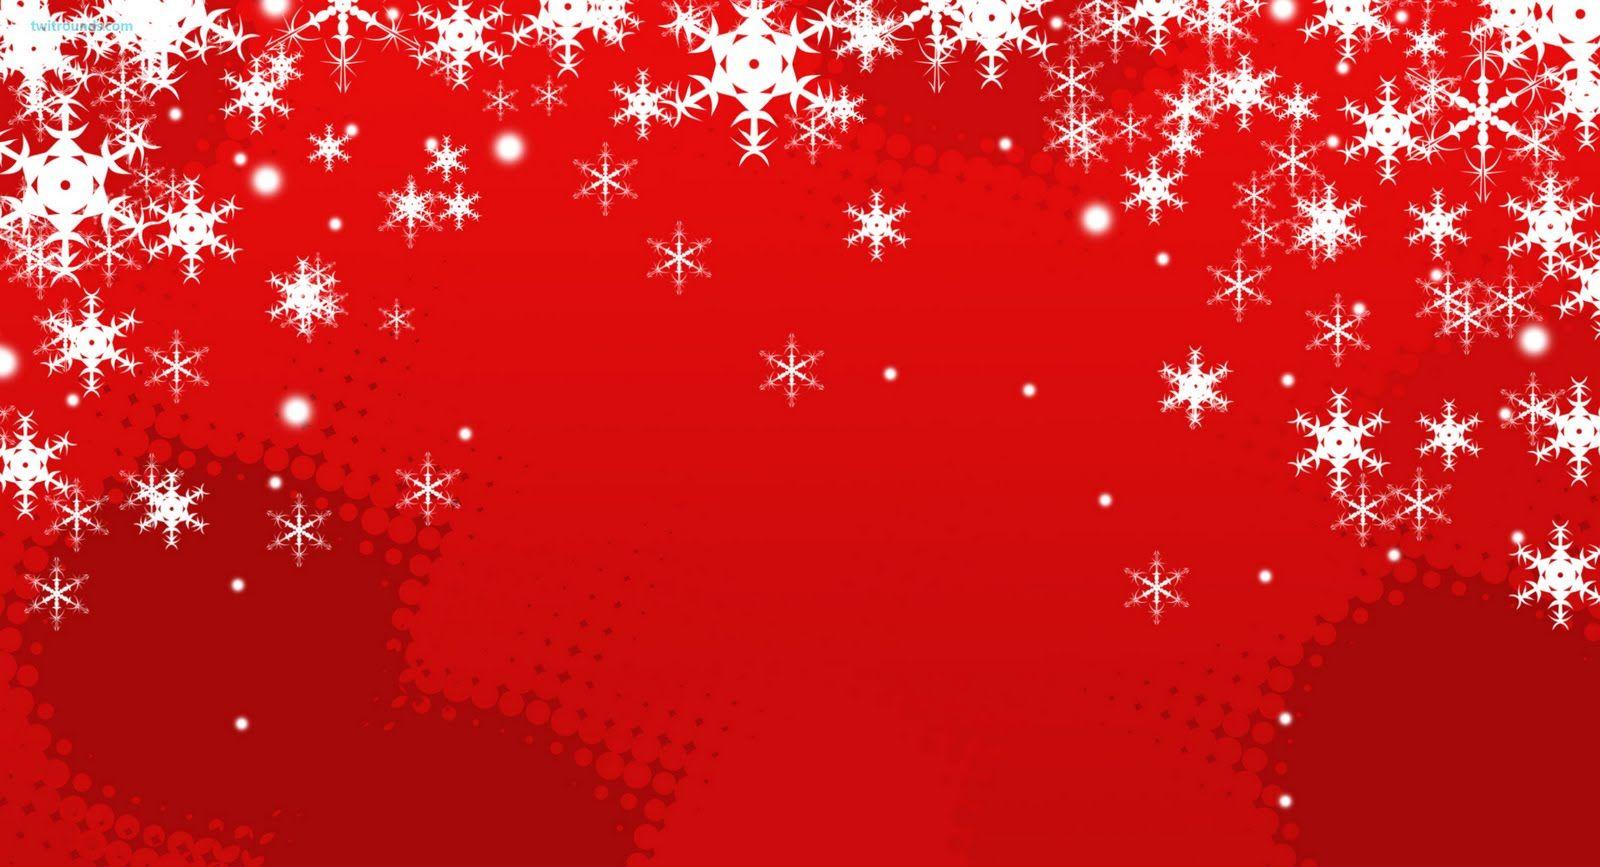 Happy Holidays Christmas White Snowflakes Desktop Red Backgrounds X